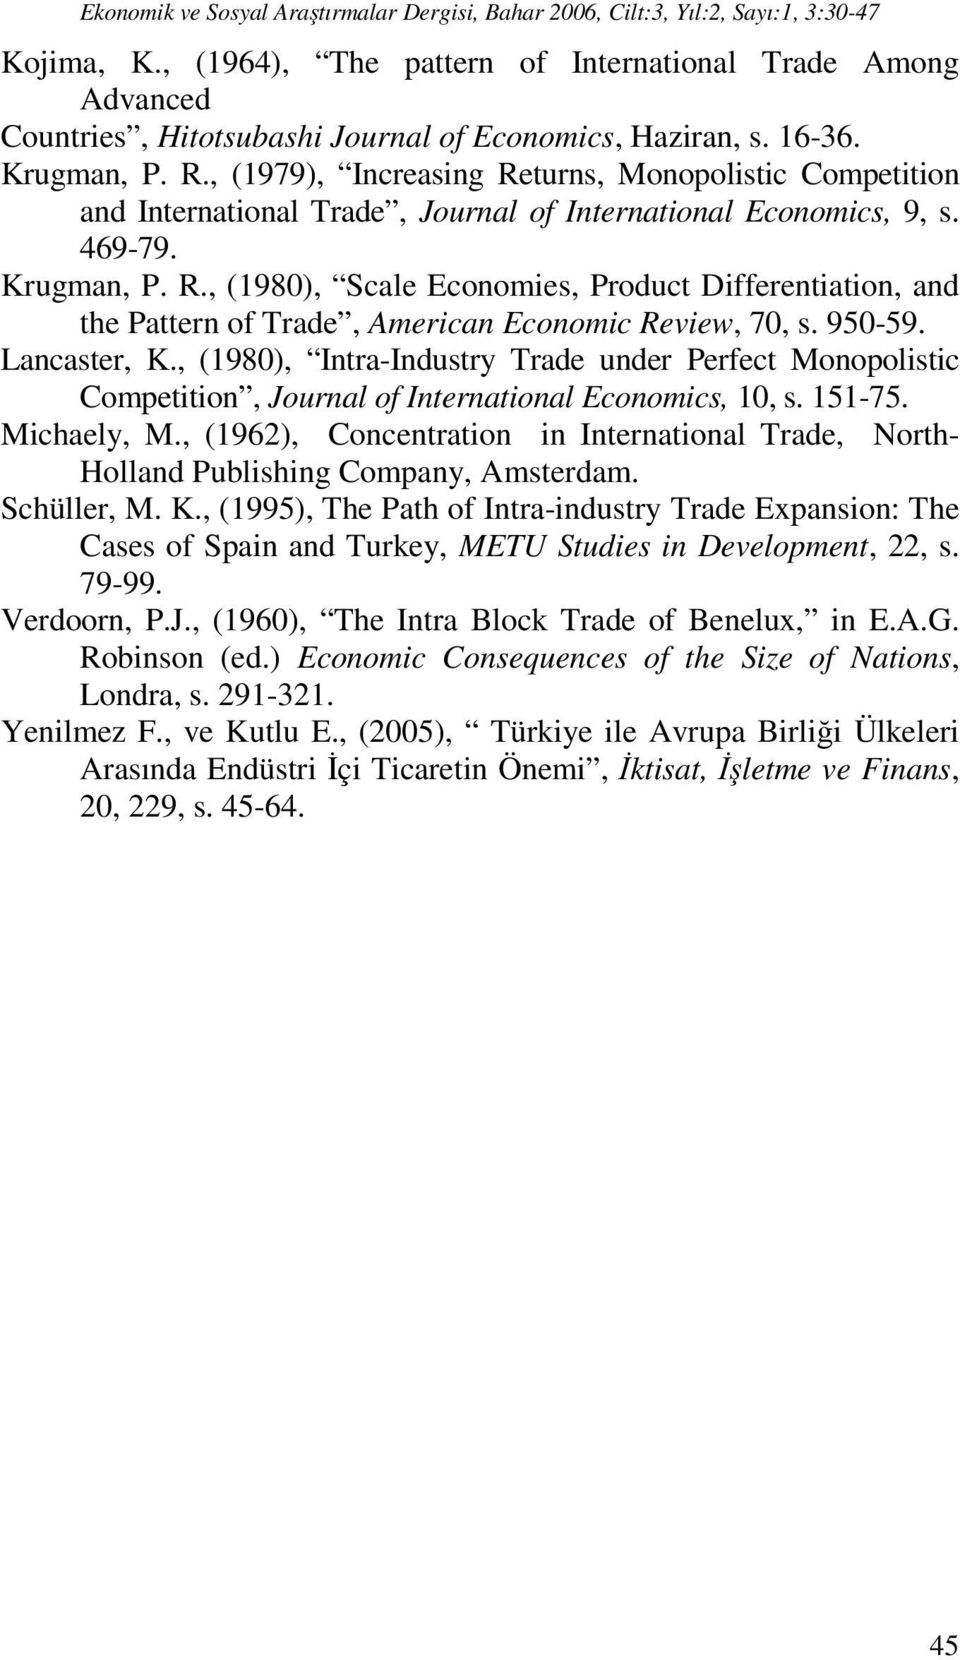 950-59. Lancaster, K., (1980), Intra-Industry Trade under Perfect Monopolistic Competition, Journal of International Economics, 10, s. 151-75. Michaely, M.